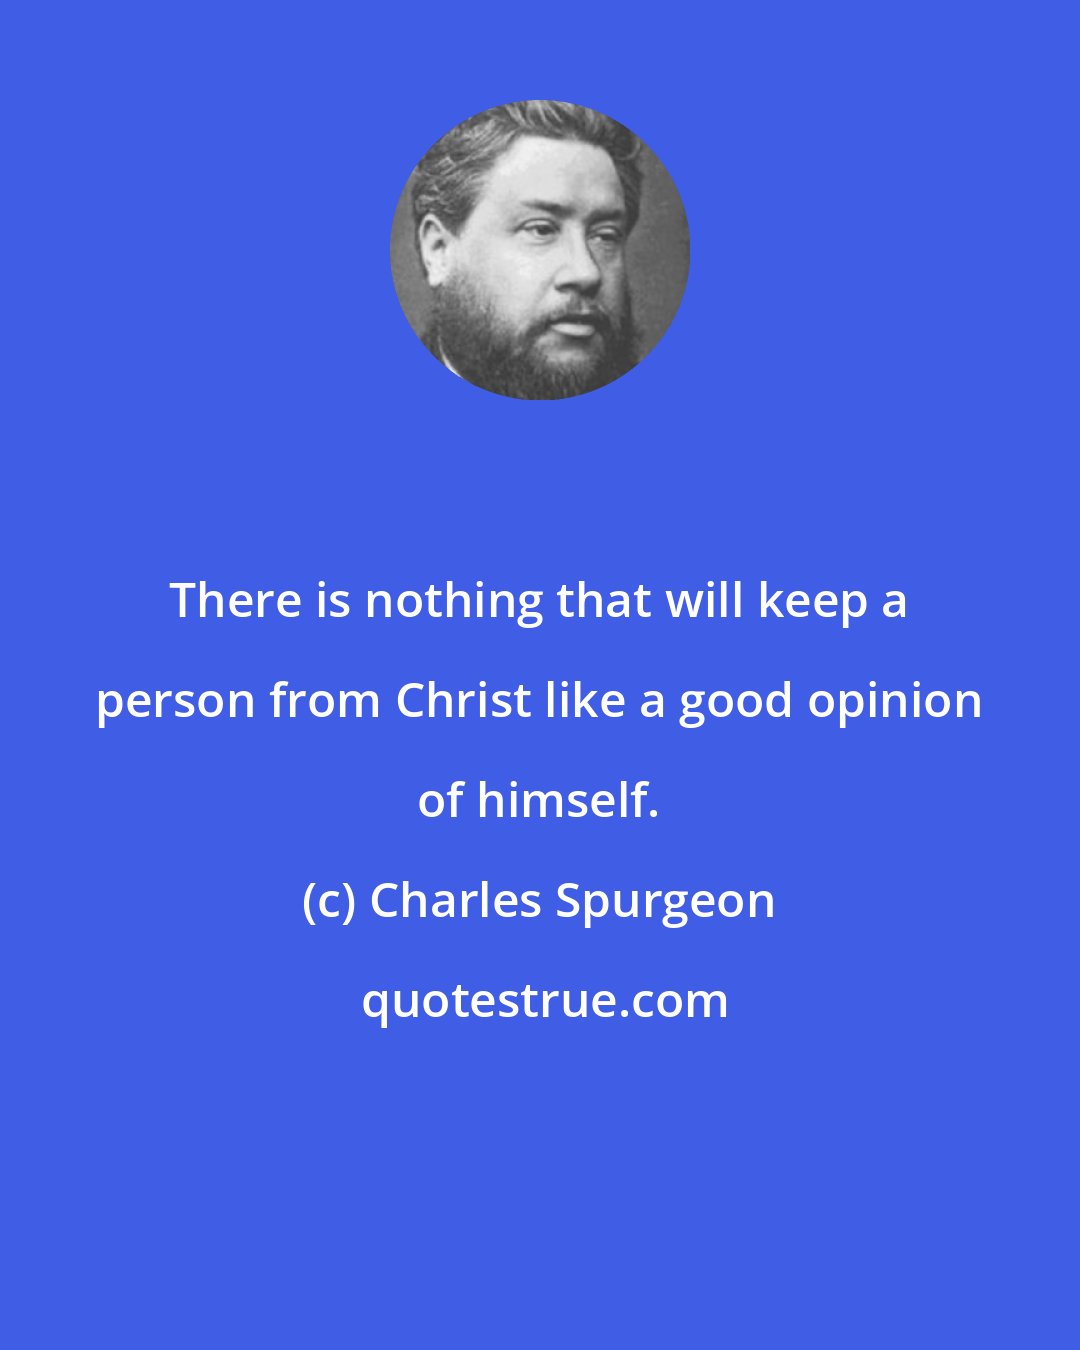 Charles Spurgeon: There is nothing that will keep a person from Christ like a good opinion of himself.